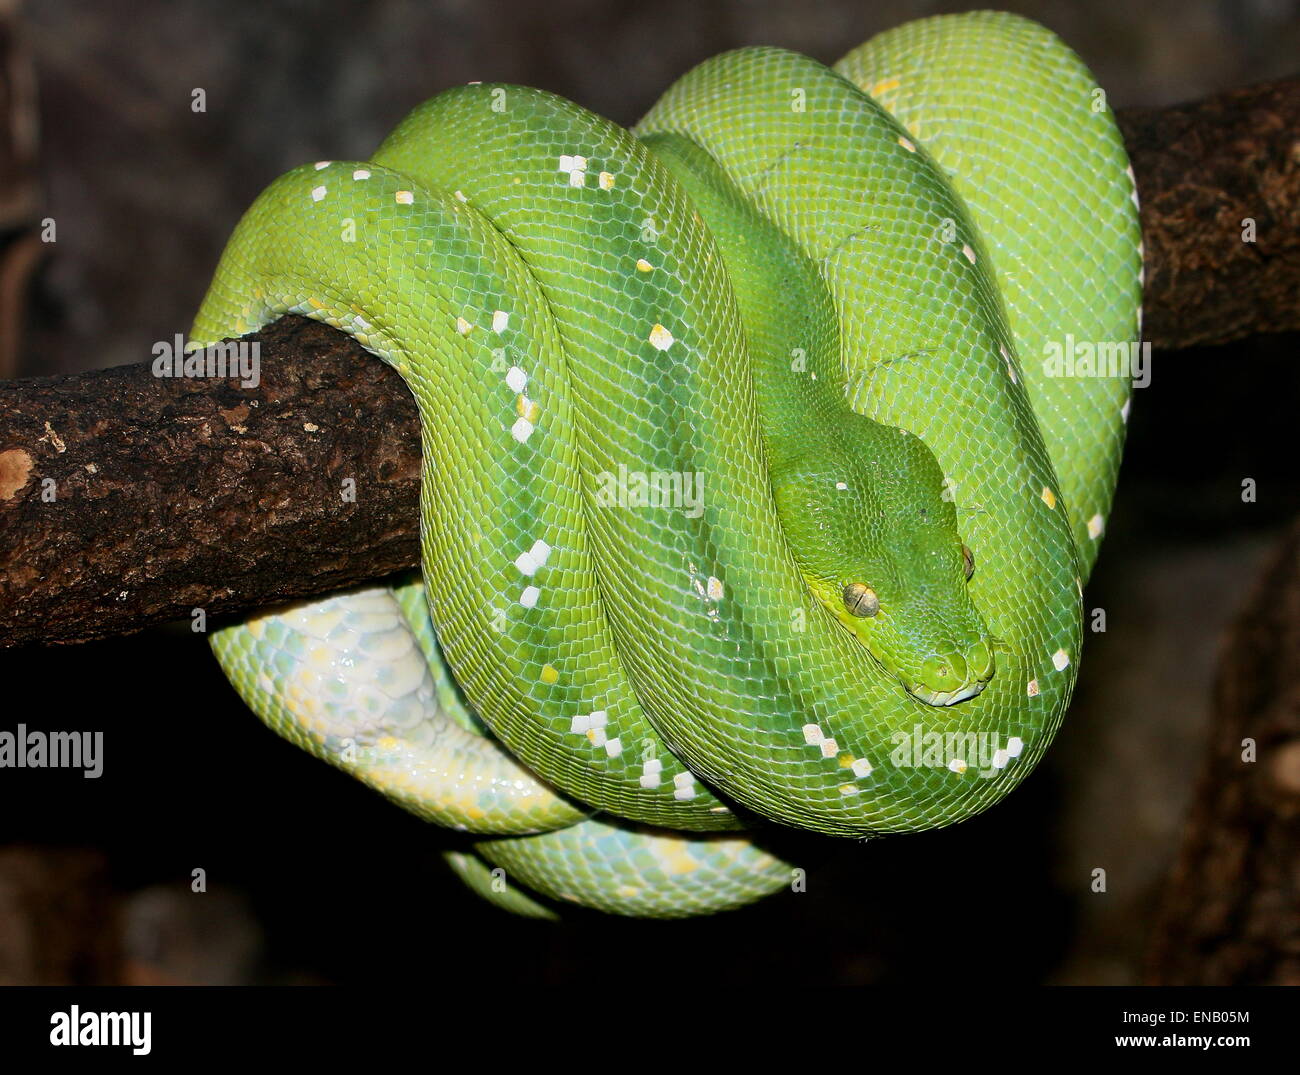 Southeast Asian Green tree python or Chondro (Morelia viridis), hanging from a branch, all coiled up Stock Photo